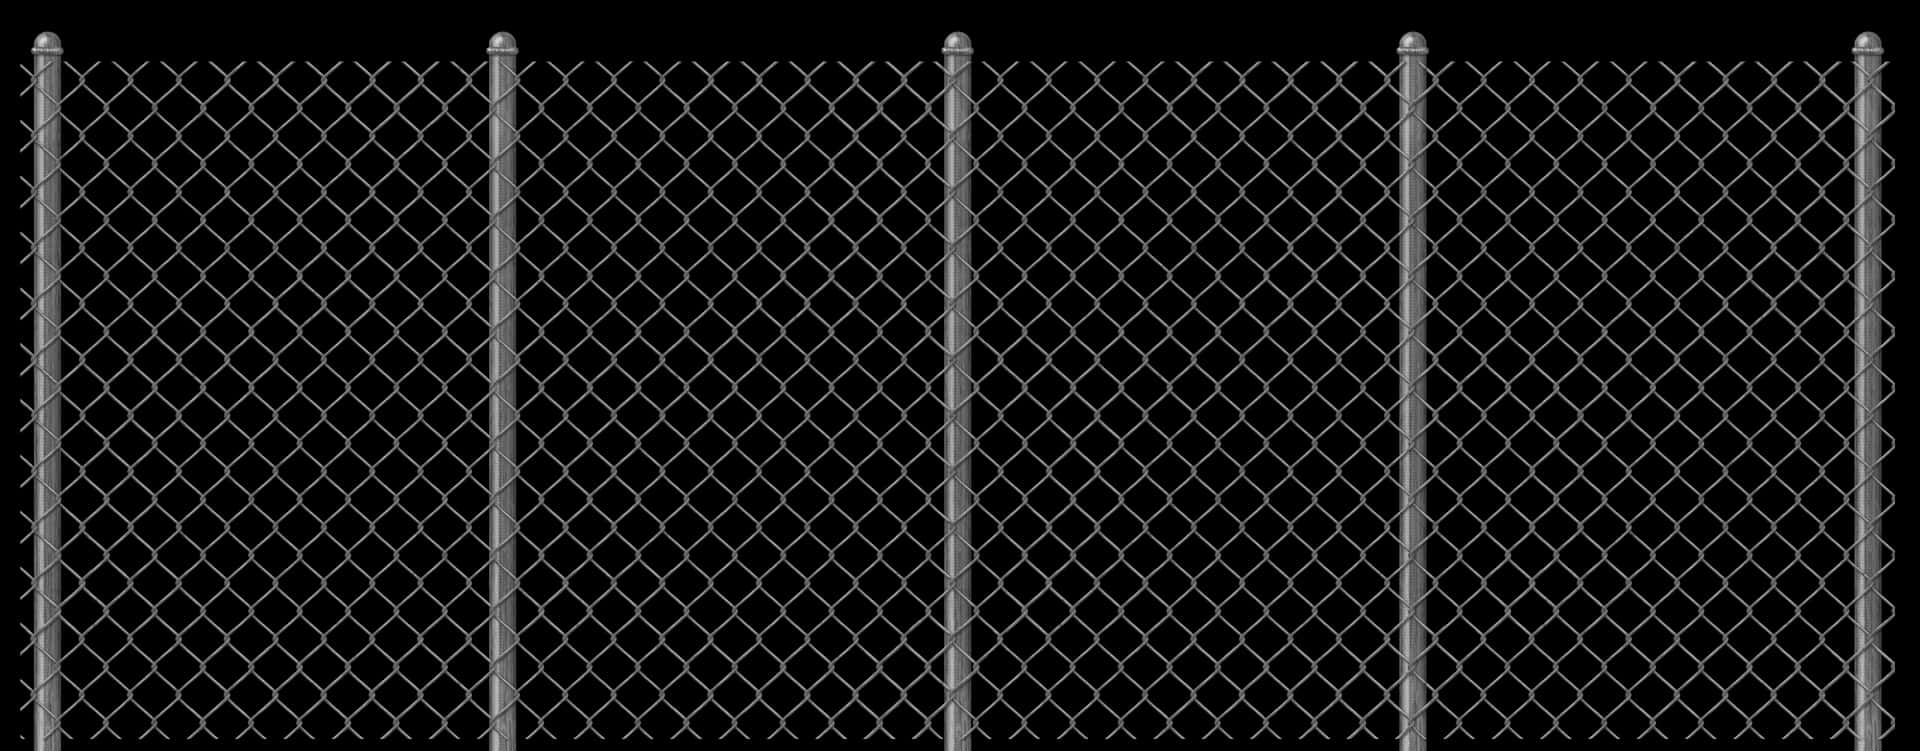 A Chain Link Fence On A Black Background